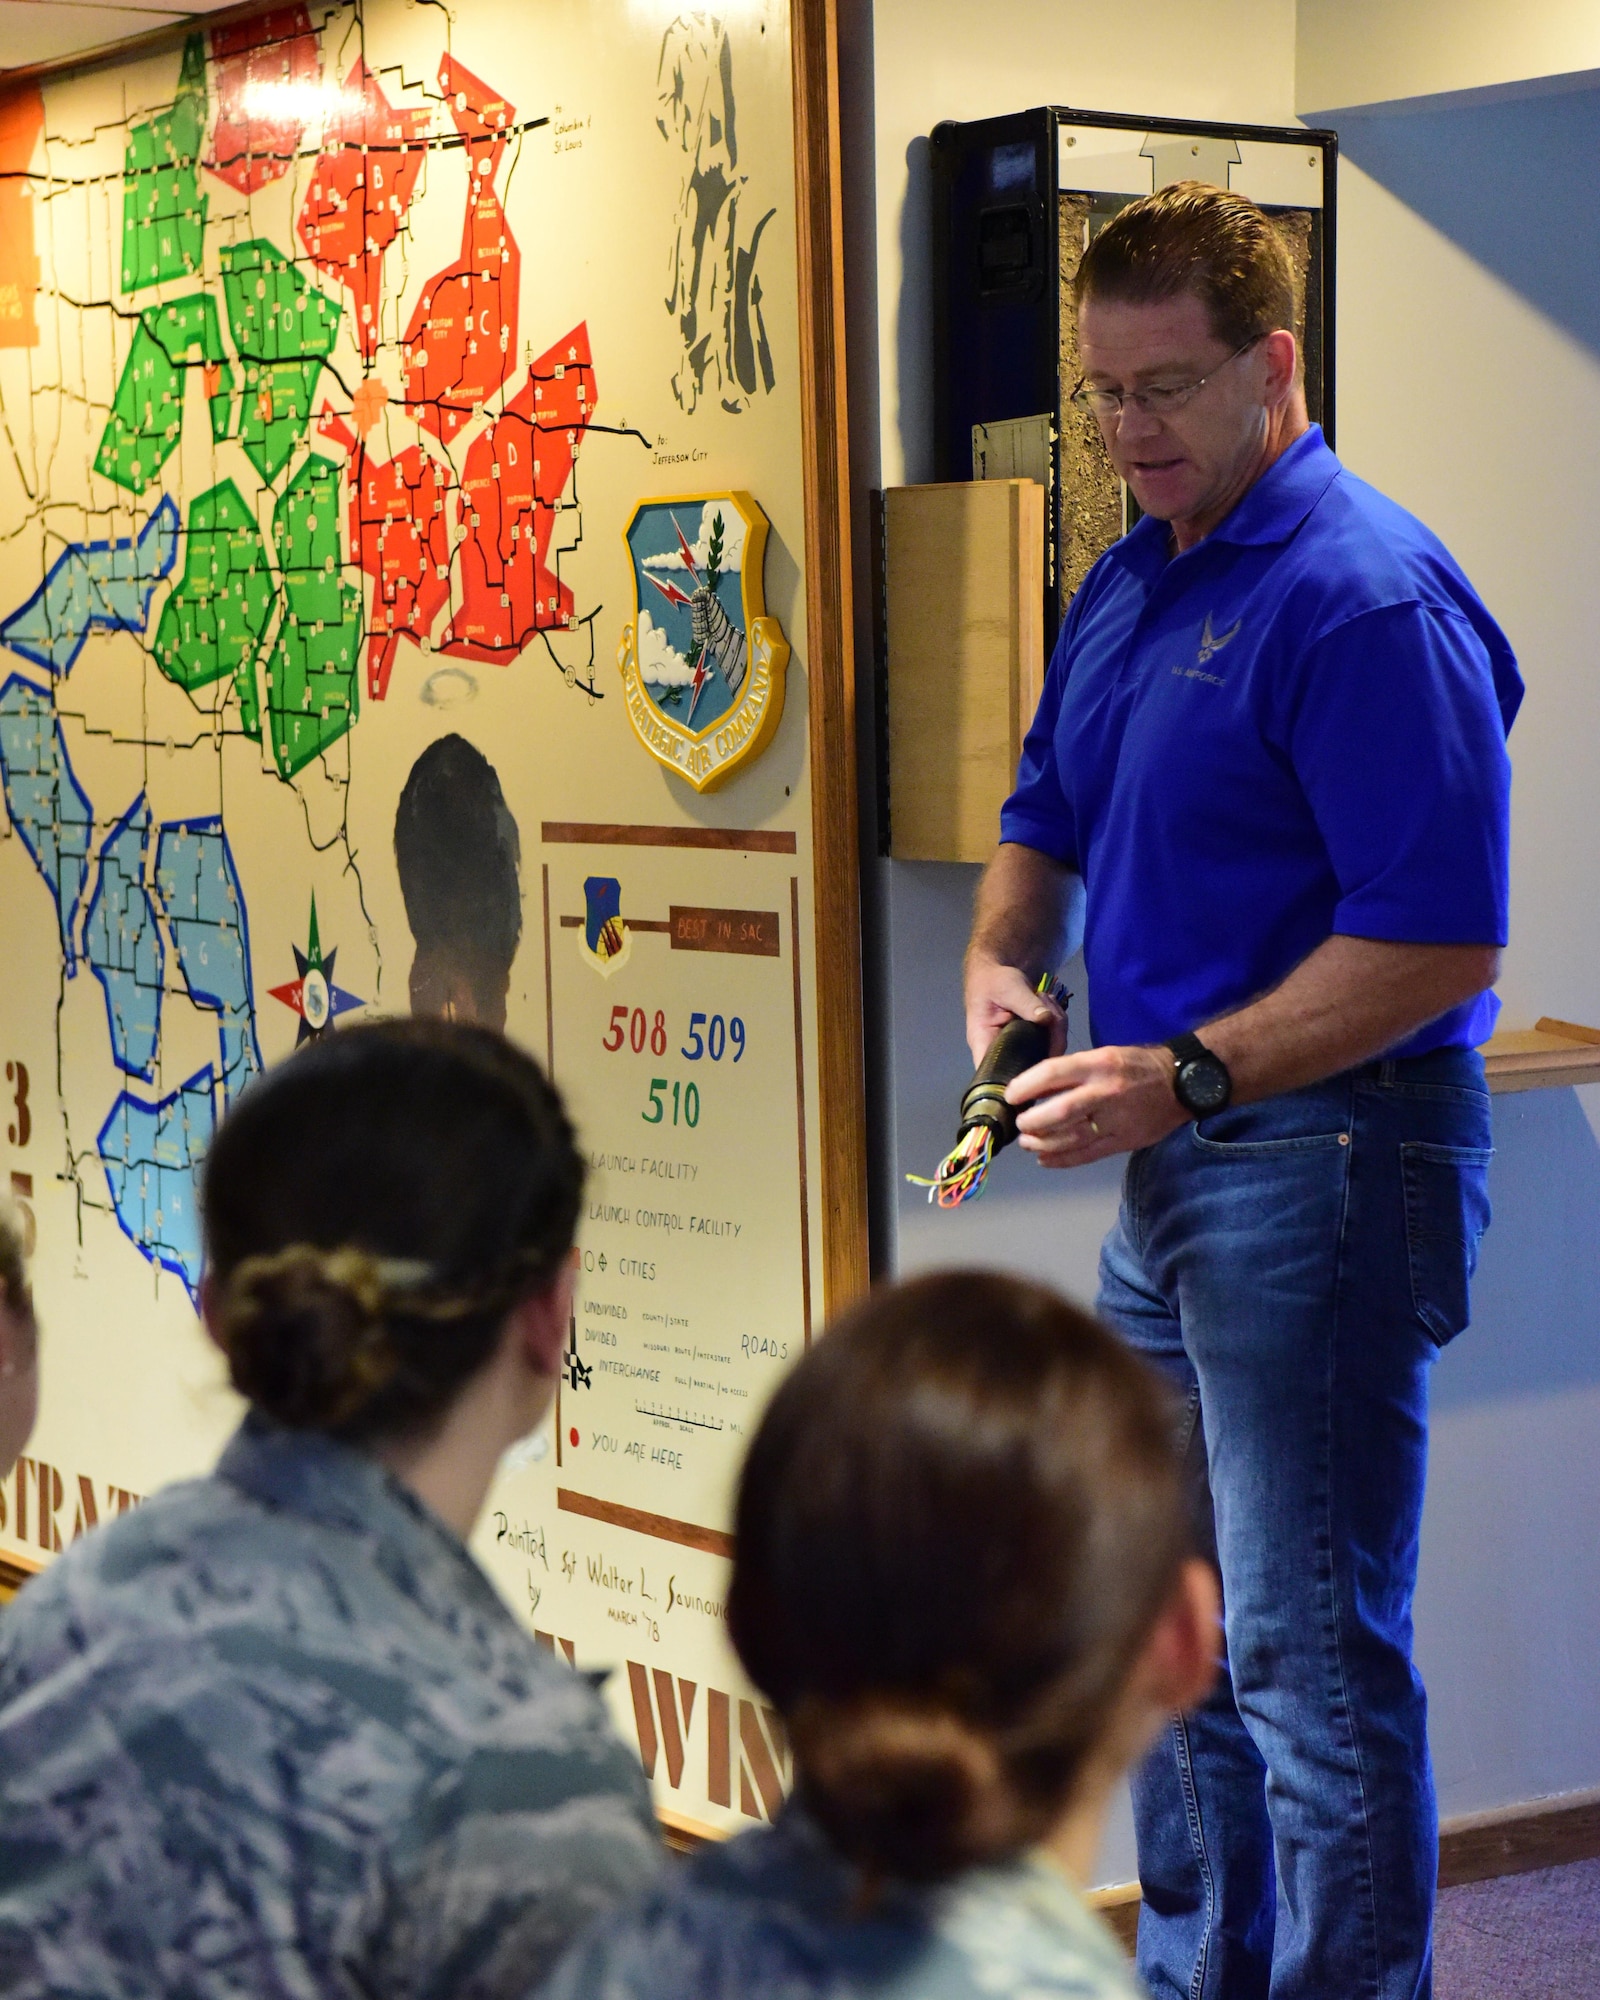 David Grisdale, the director of historical property assigned to the 509th Bomb Wing, tour the Airmen through Oscar-1 to help them understand Whiteman's history and involvement during the Cold War.